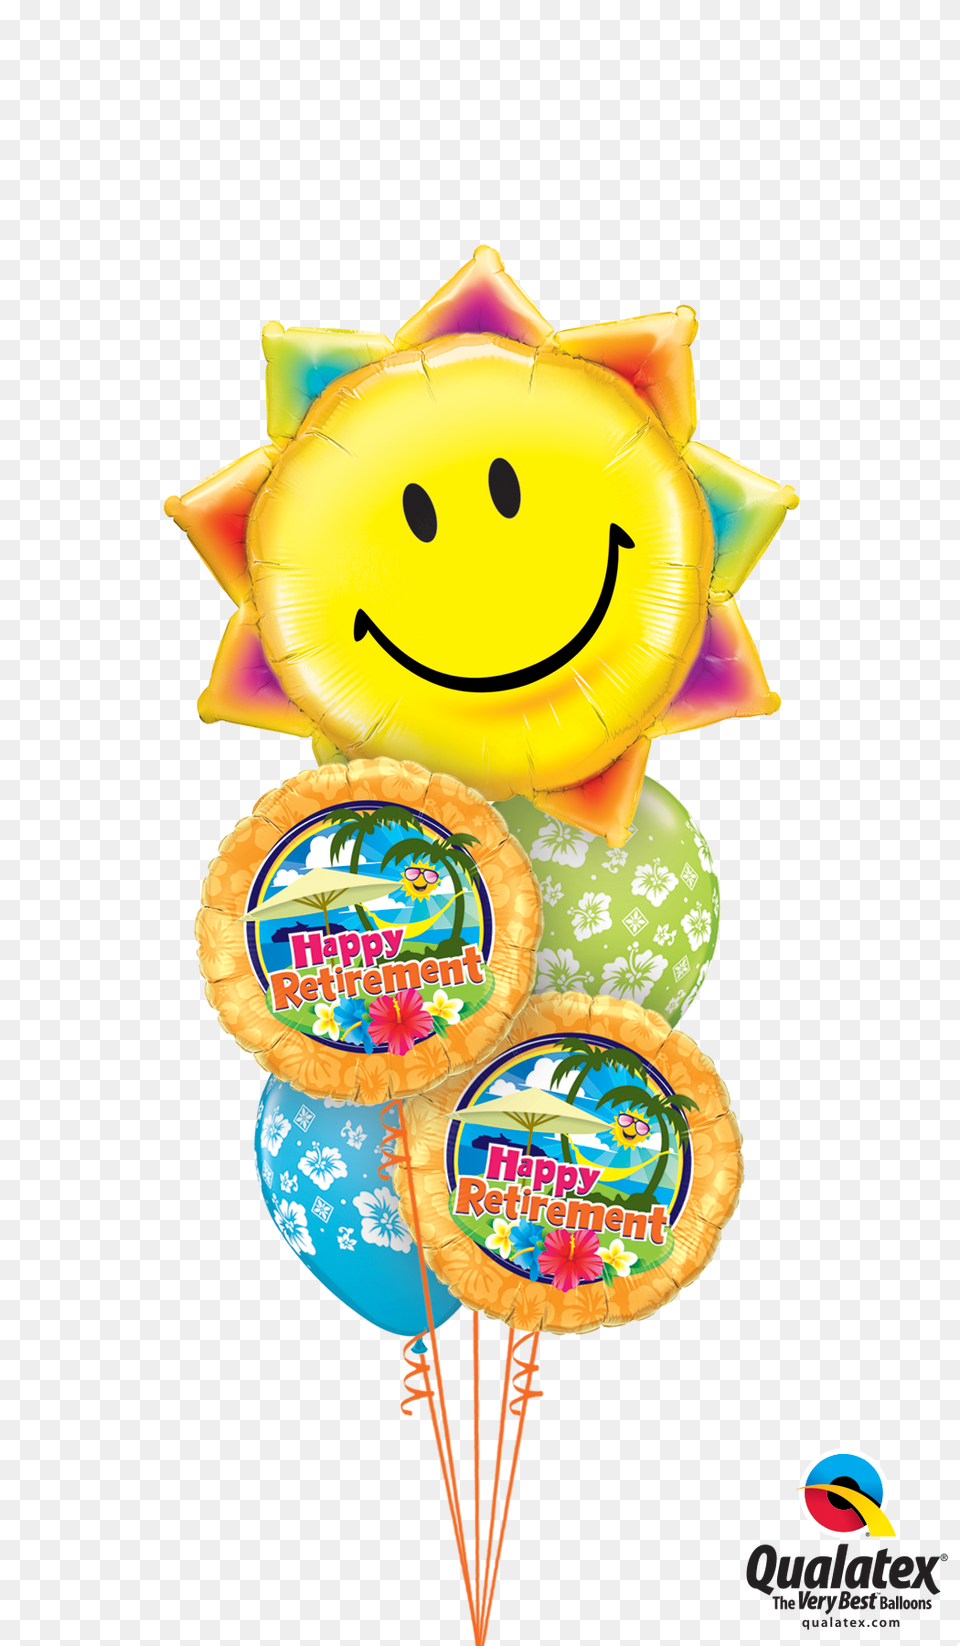 Transparent Happy Retirement Happy Birthday Balloons With Smiley, Food, Sweets, Balloon Png Image